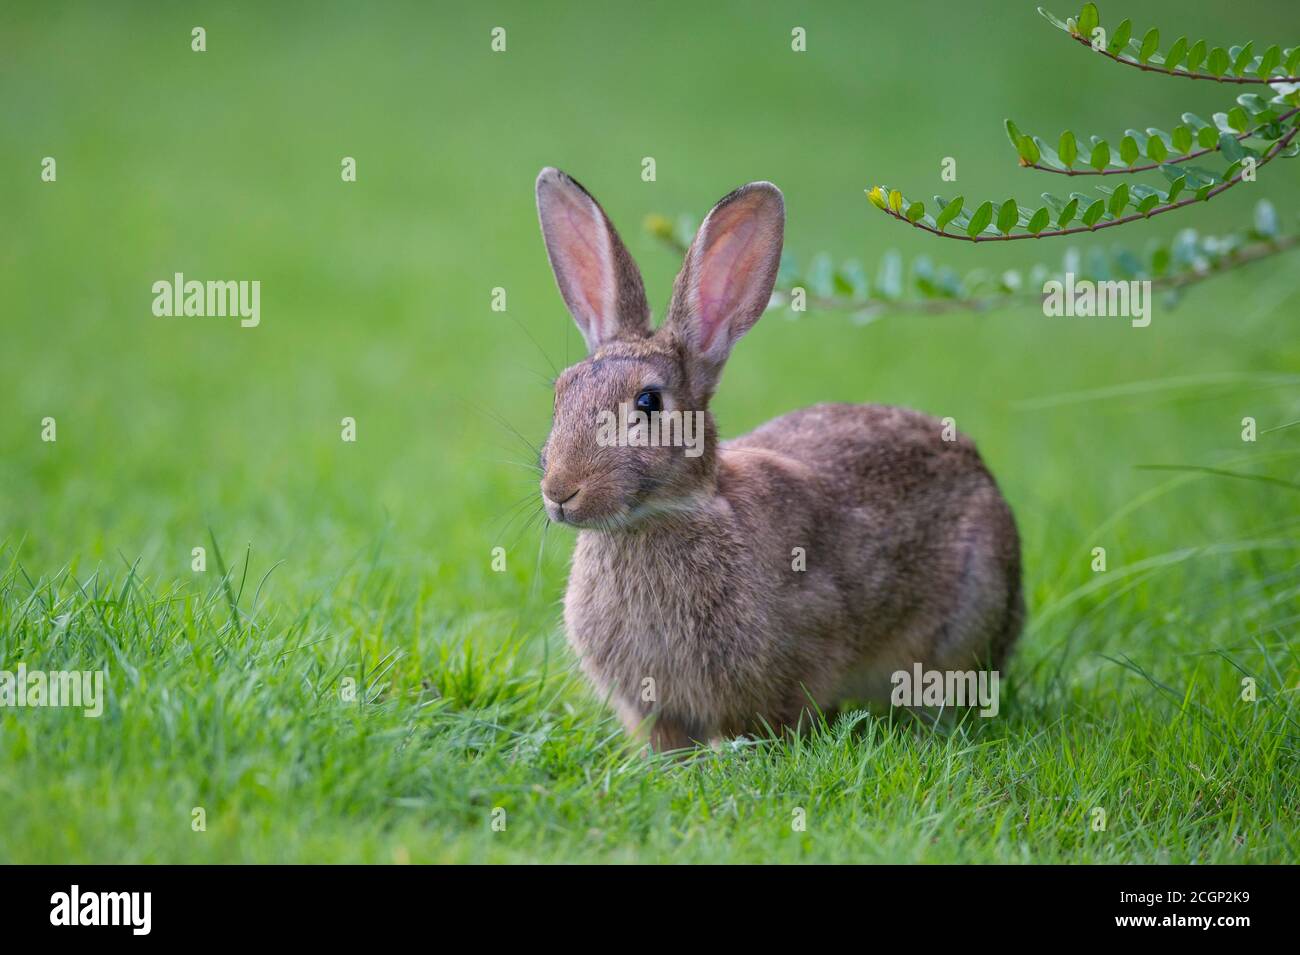 European rabbit (Oryctolagus cuniculus) in a meadow, attentive, pointed ears, Lower Saxony, Germany Stock Photo